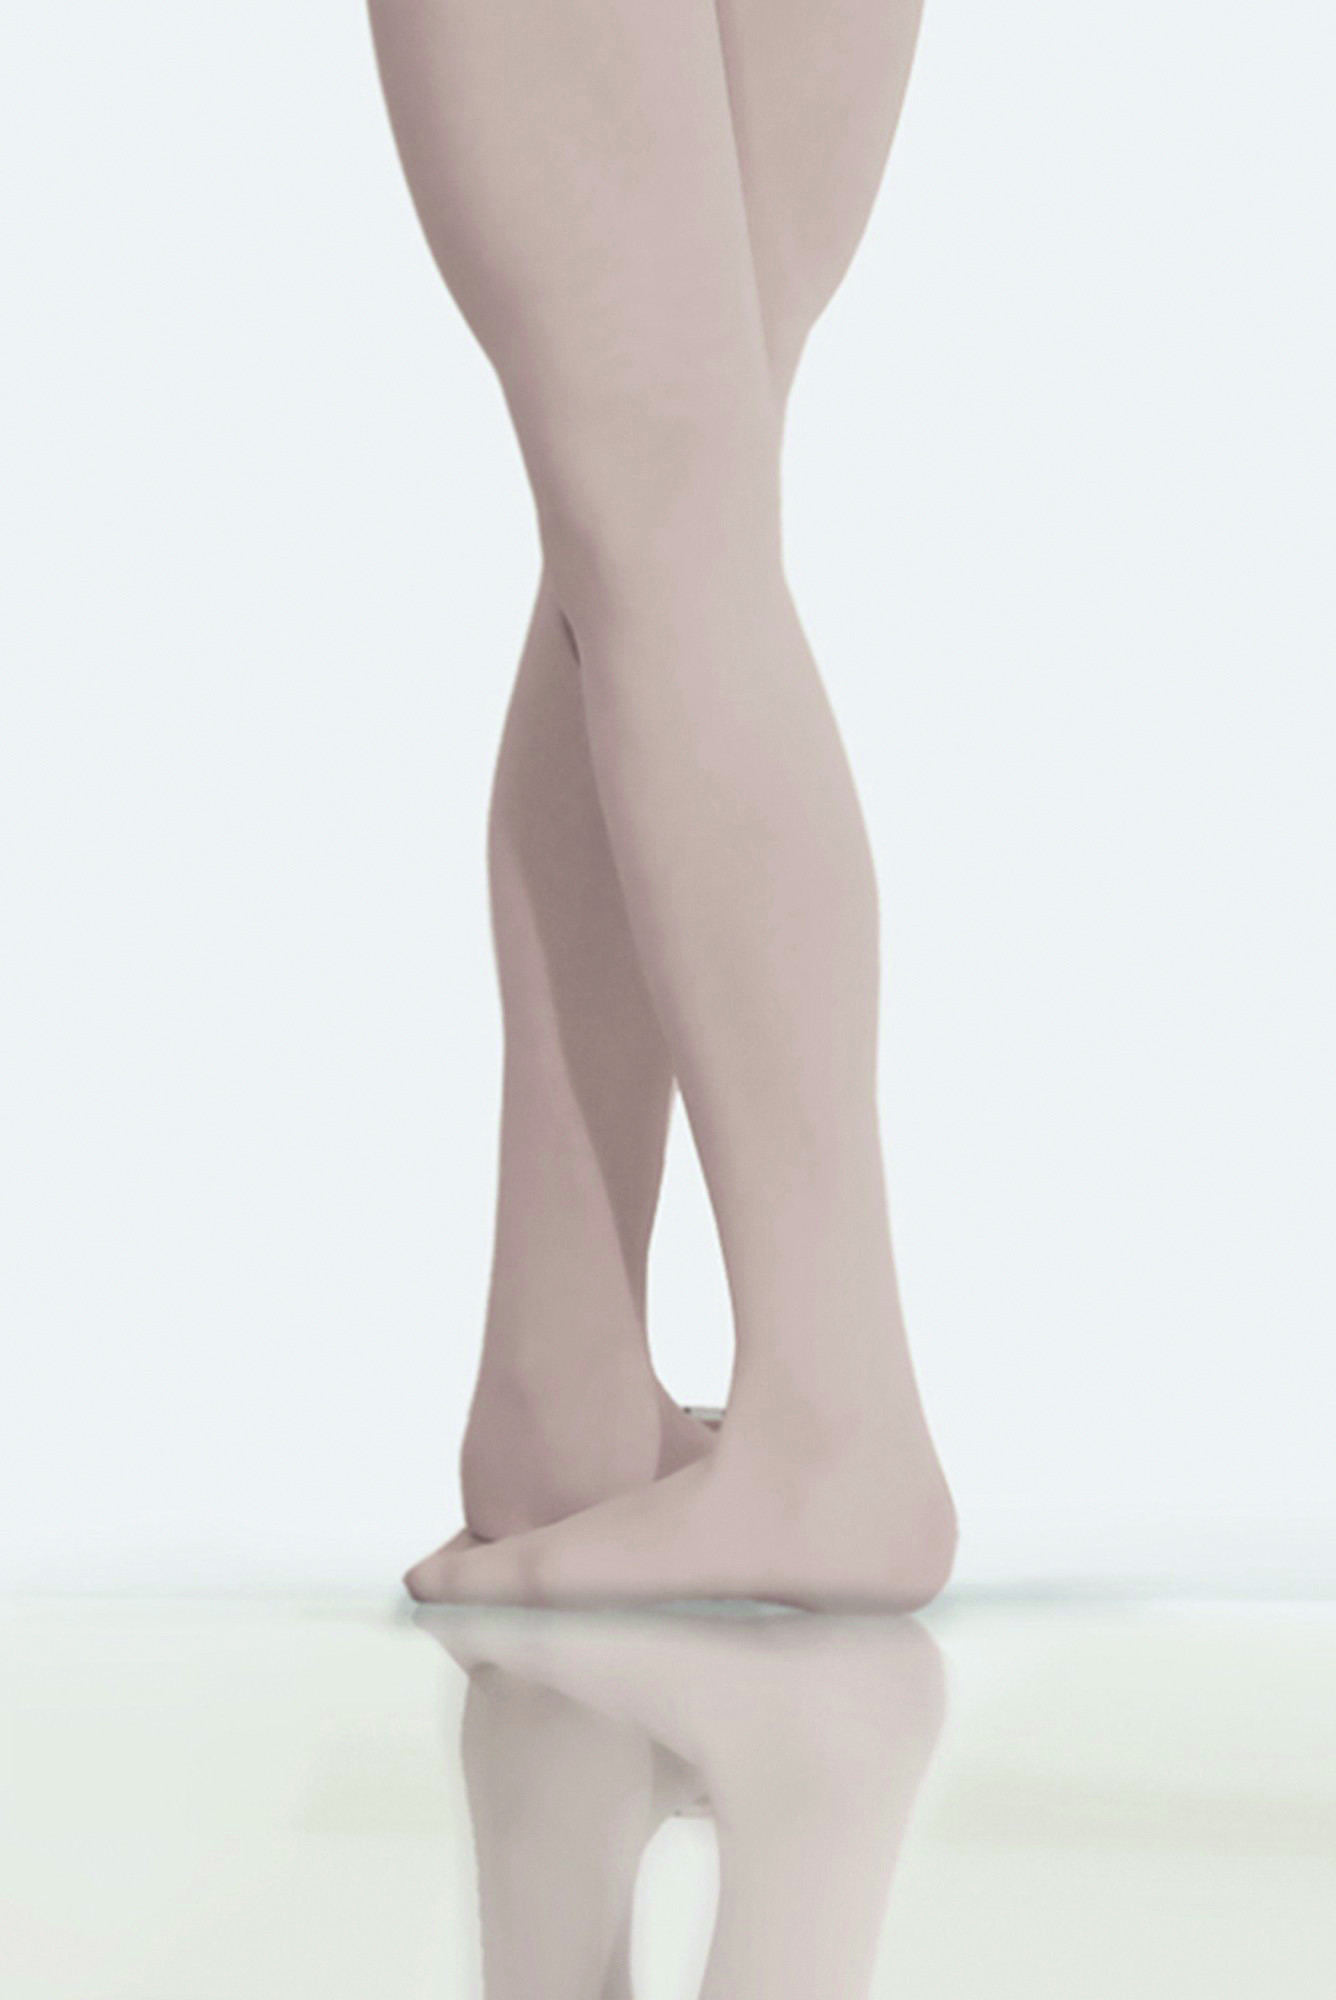 https://wearmoi.us/31228-thickbox_default/premiere-footed-tights-light-pink.jpg